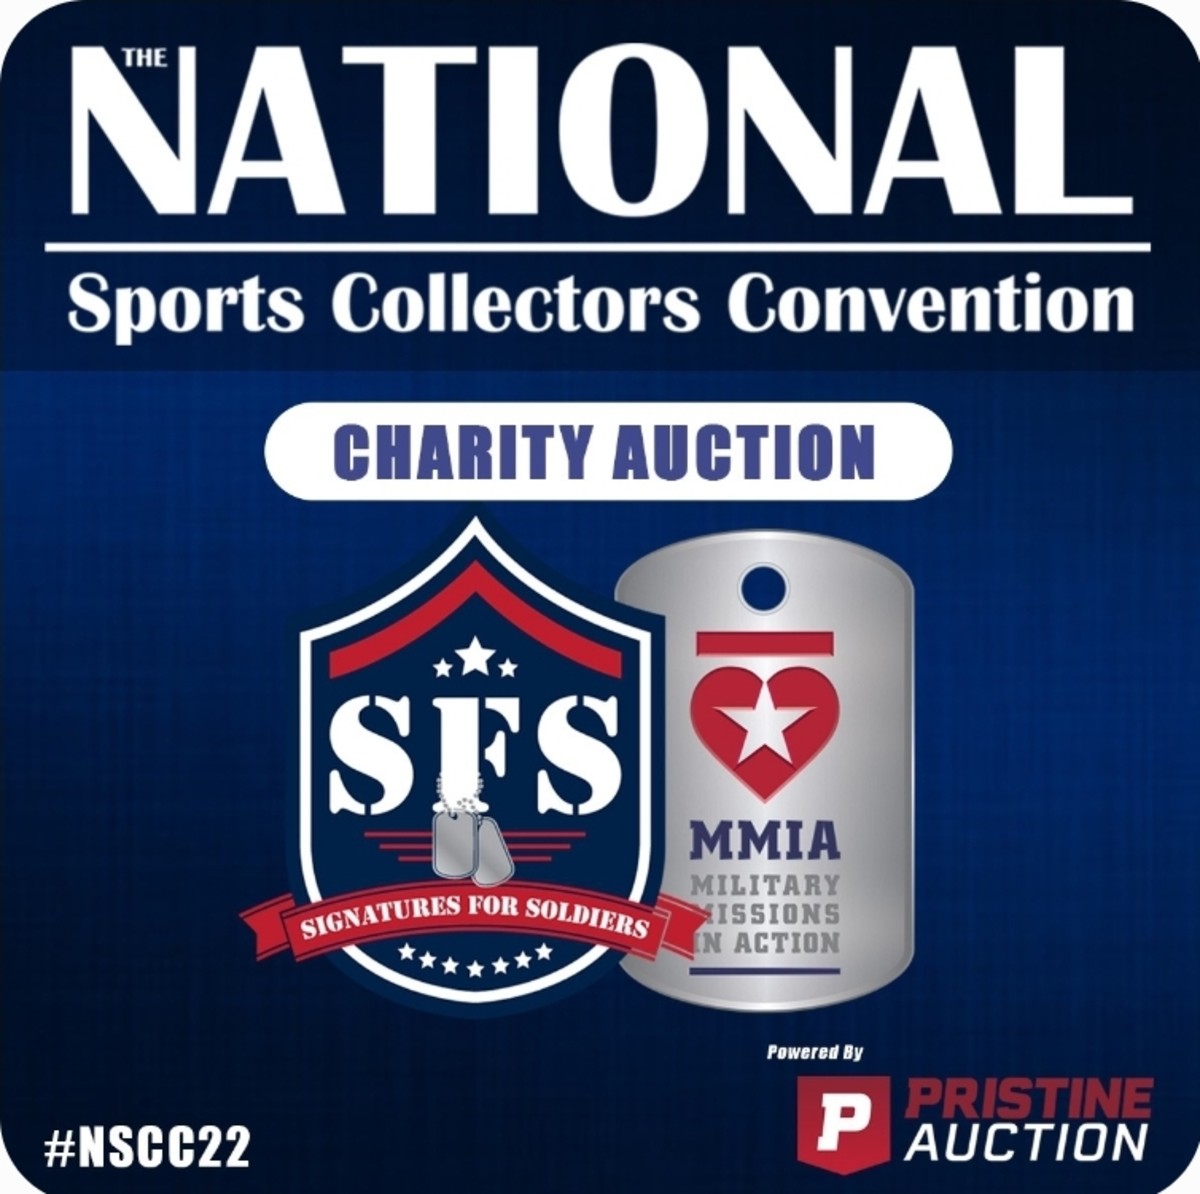 The National Sports Collectors Convention Charity Auction.